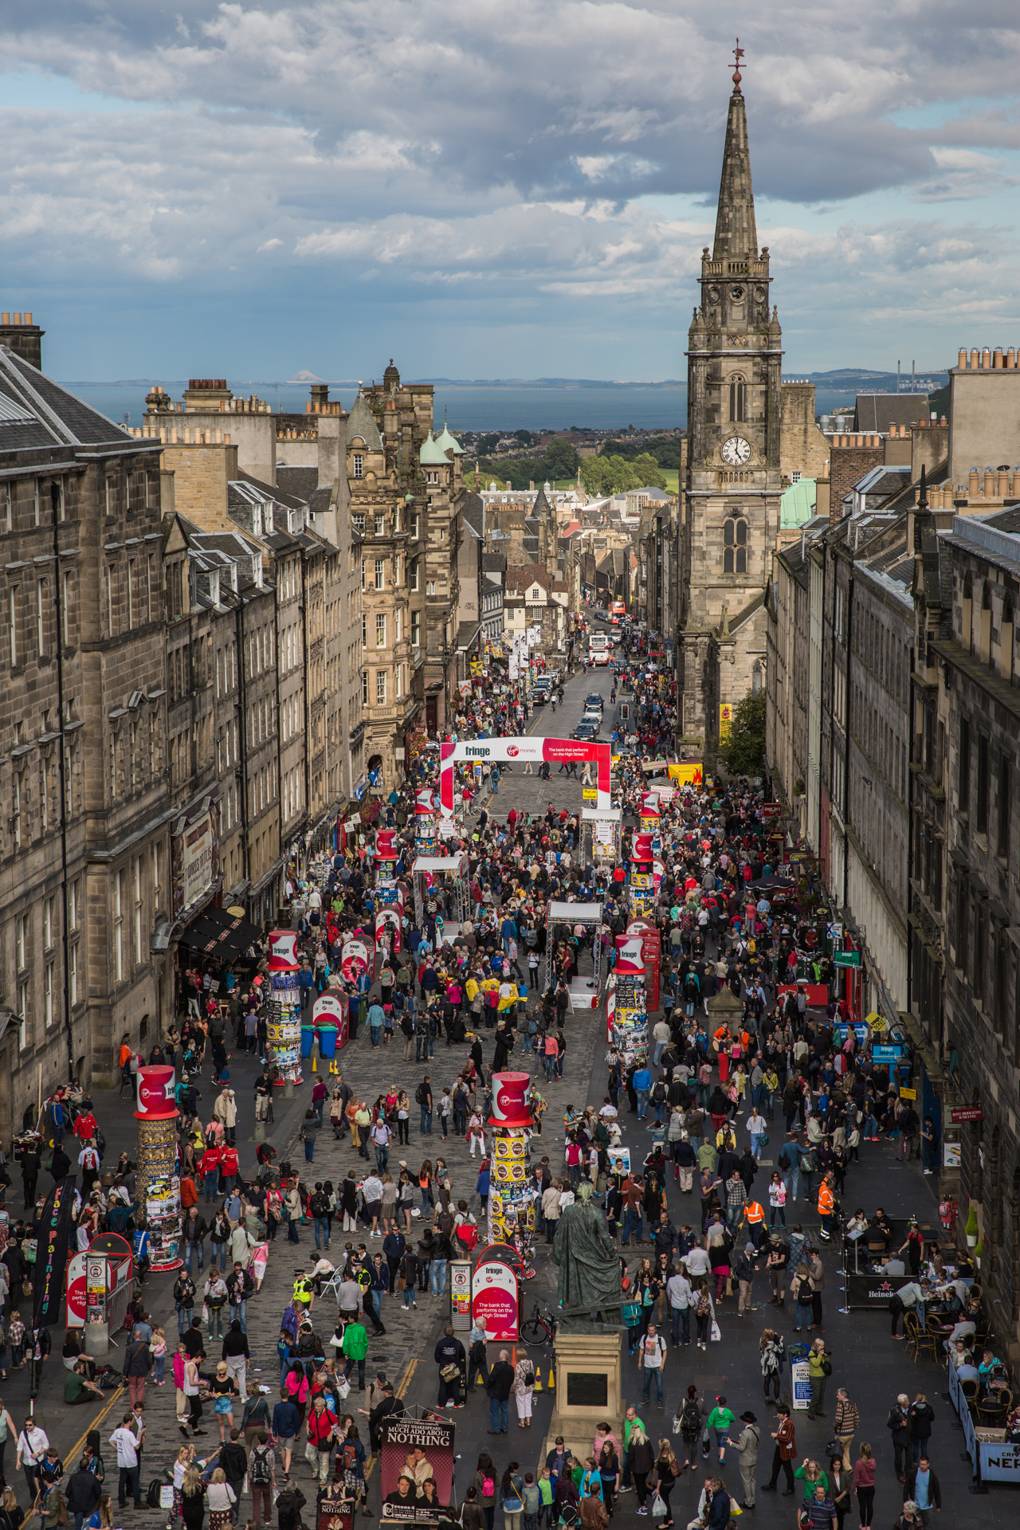 Edinburgh Festival 2018: Where to stay and what to see | Tatler